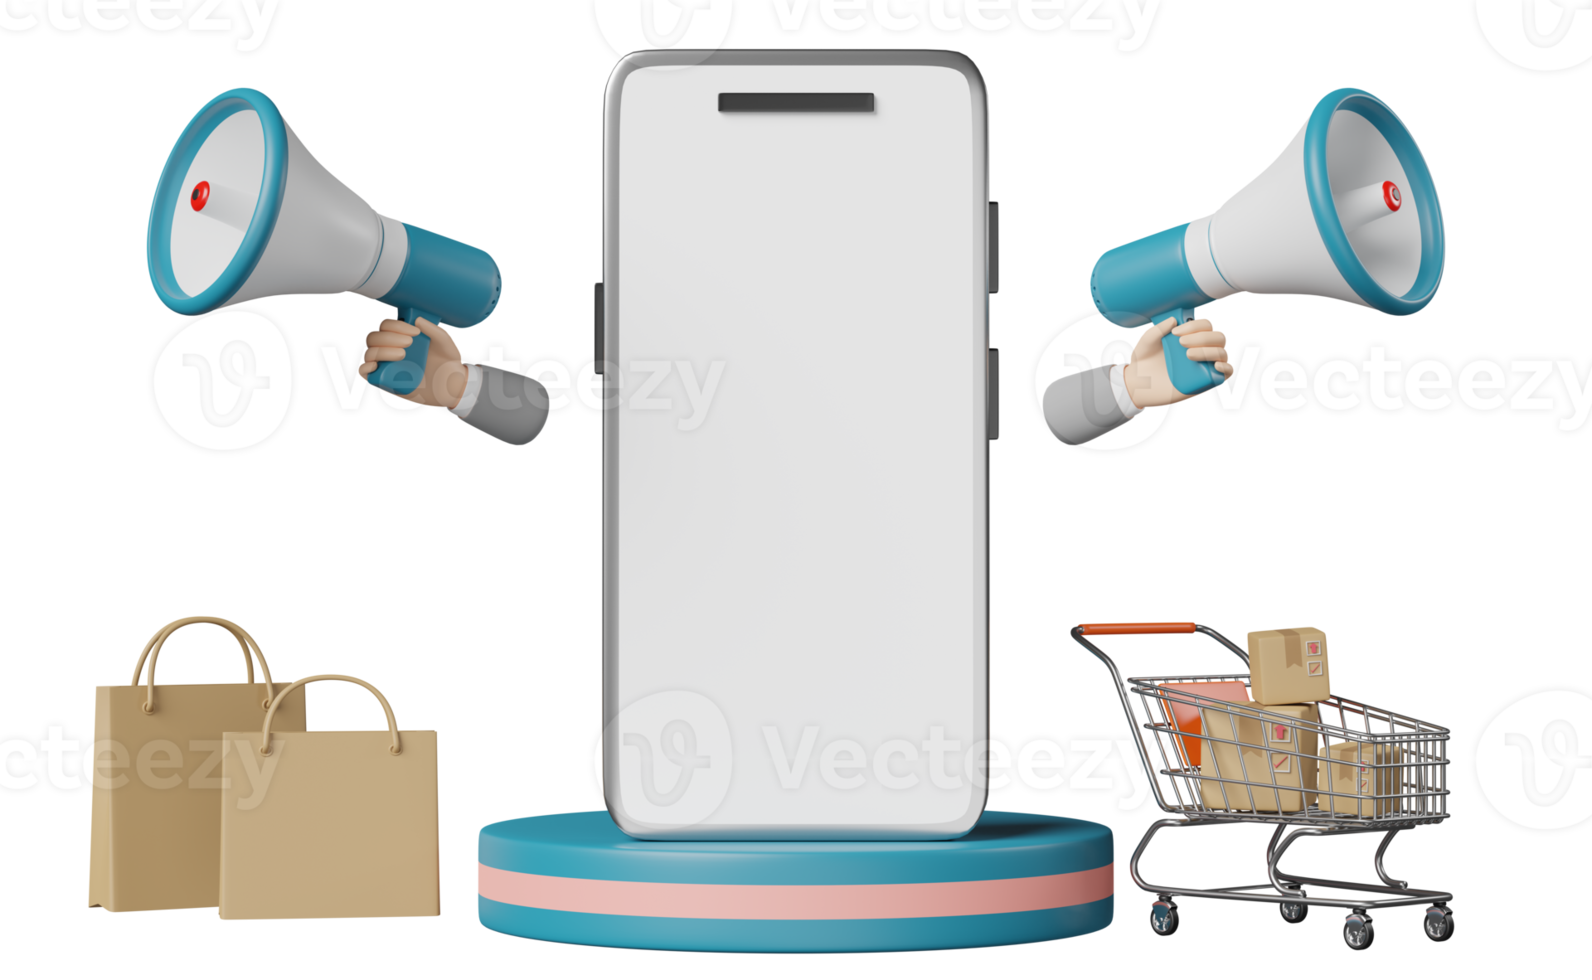 mobile phone, smartphone with blue stage podium, cart, goods cardboard box, shopping paper bag, megaphone, hand speaker isolated. online shopping sale concept, 3d illustration, 3d render png